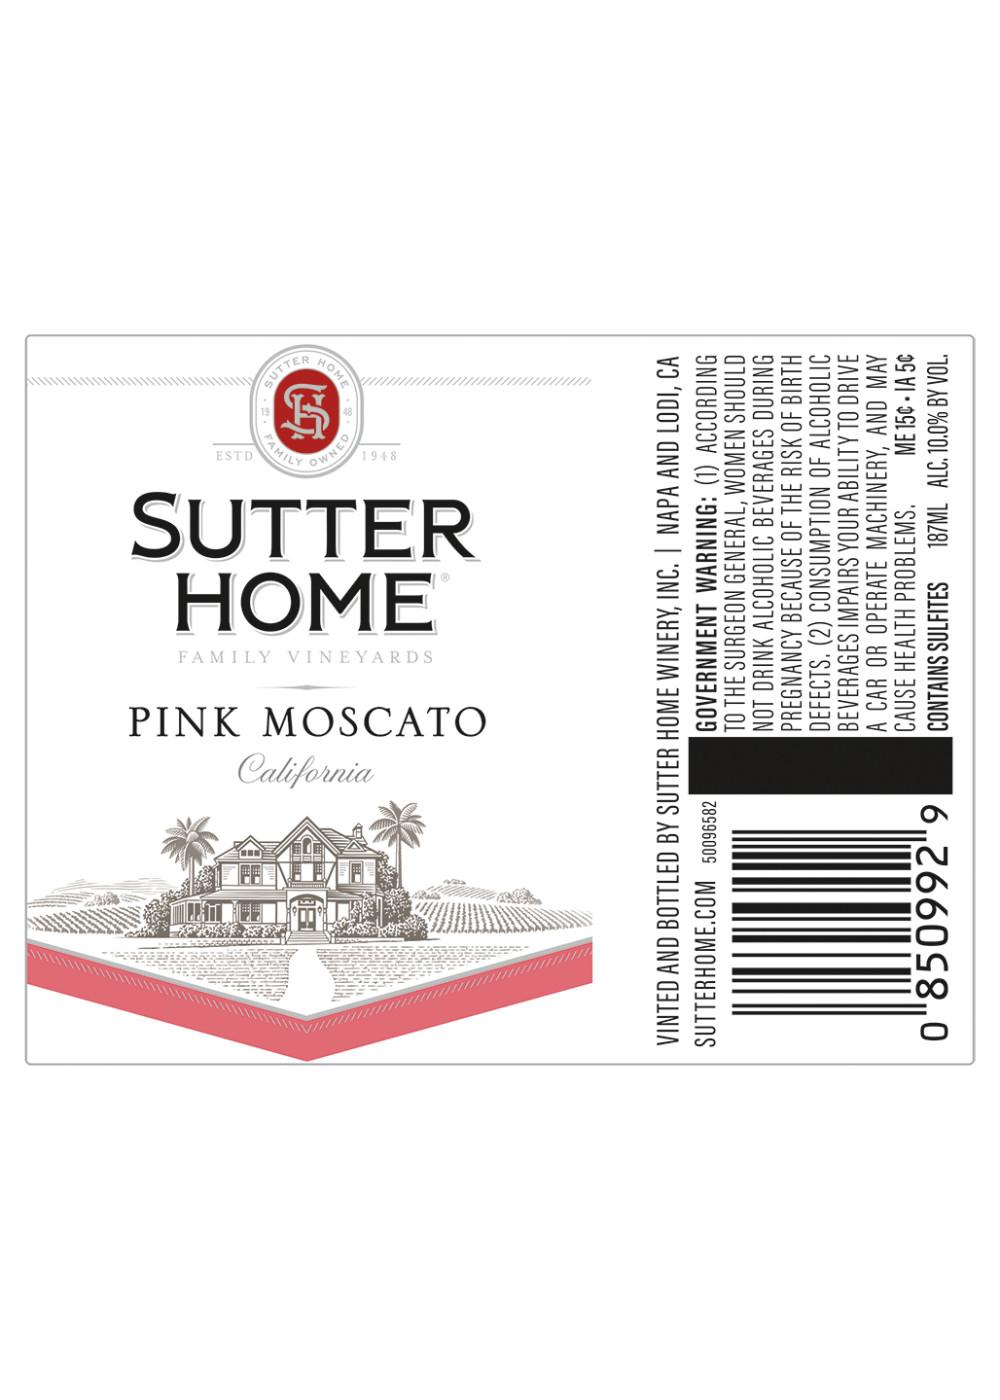 Sutter Home Family Vineyards Pink Moscato 187 mL Bottles; image 4 of 7